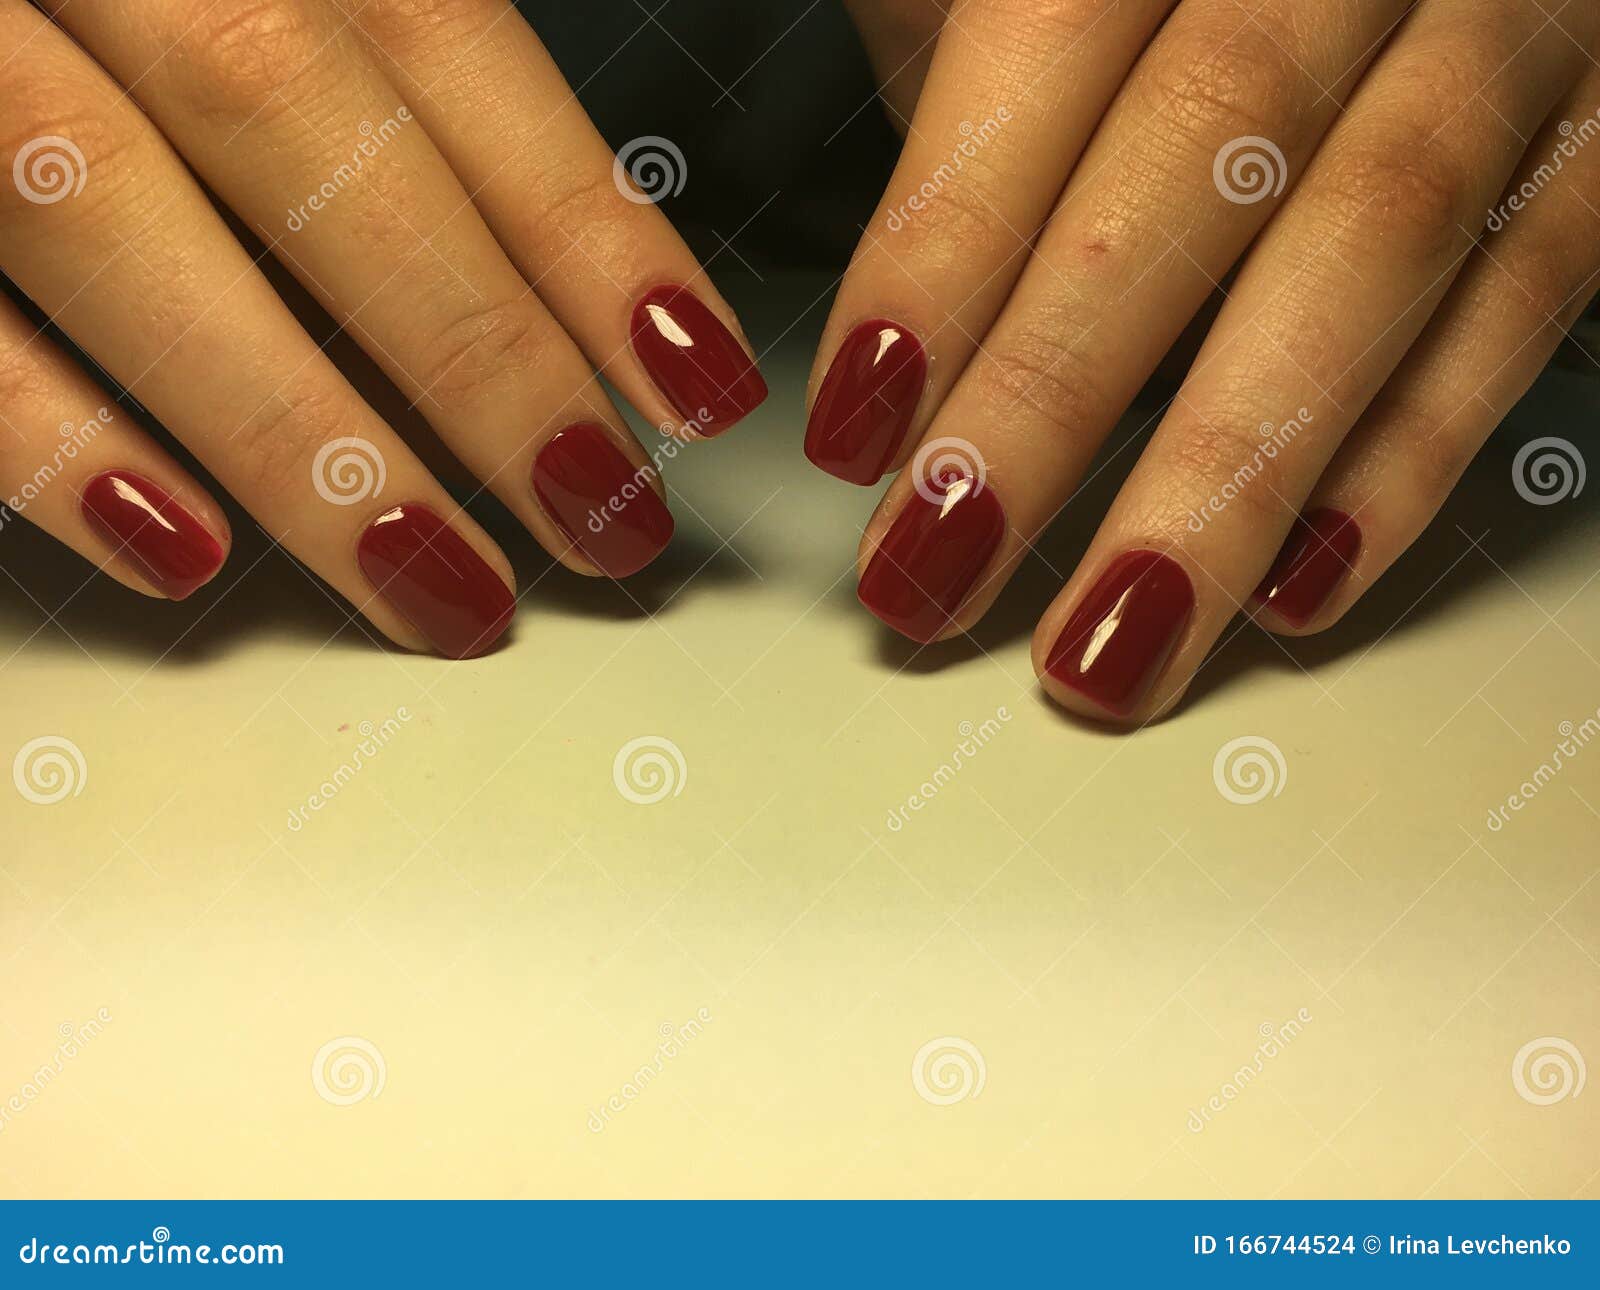 Short Red Square French Manicure - wide 6